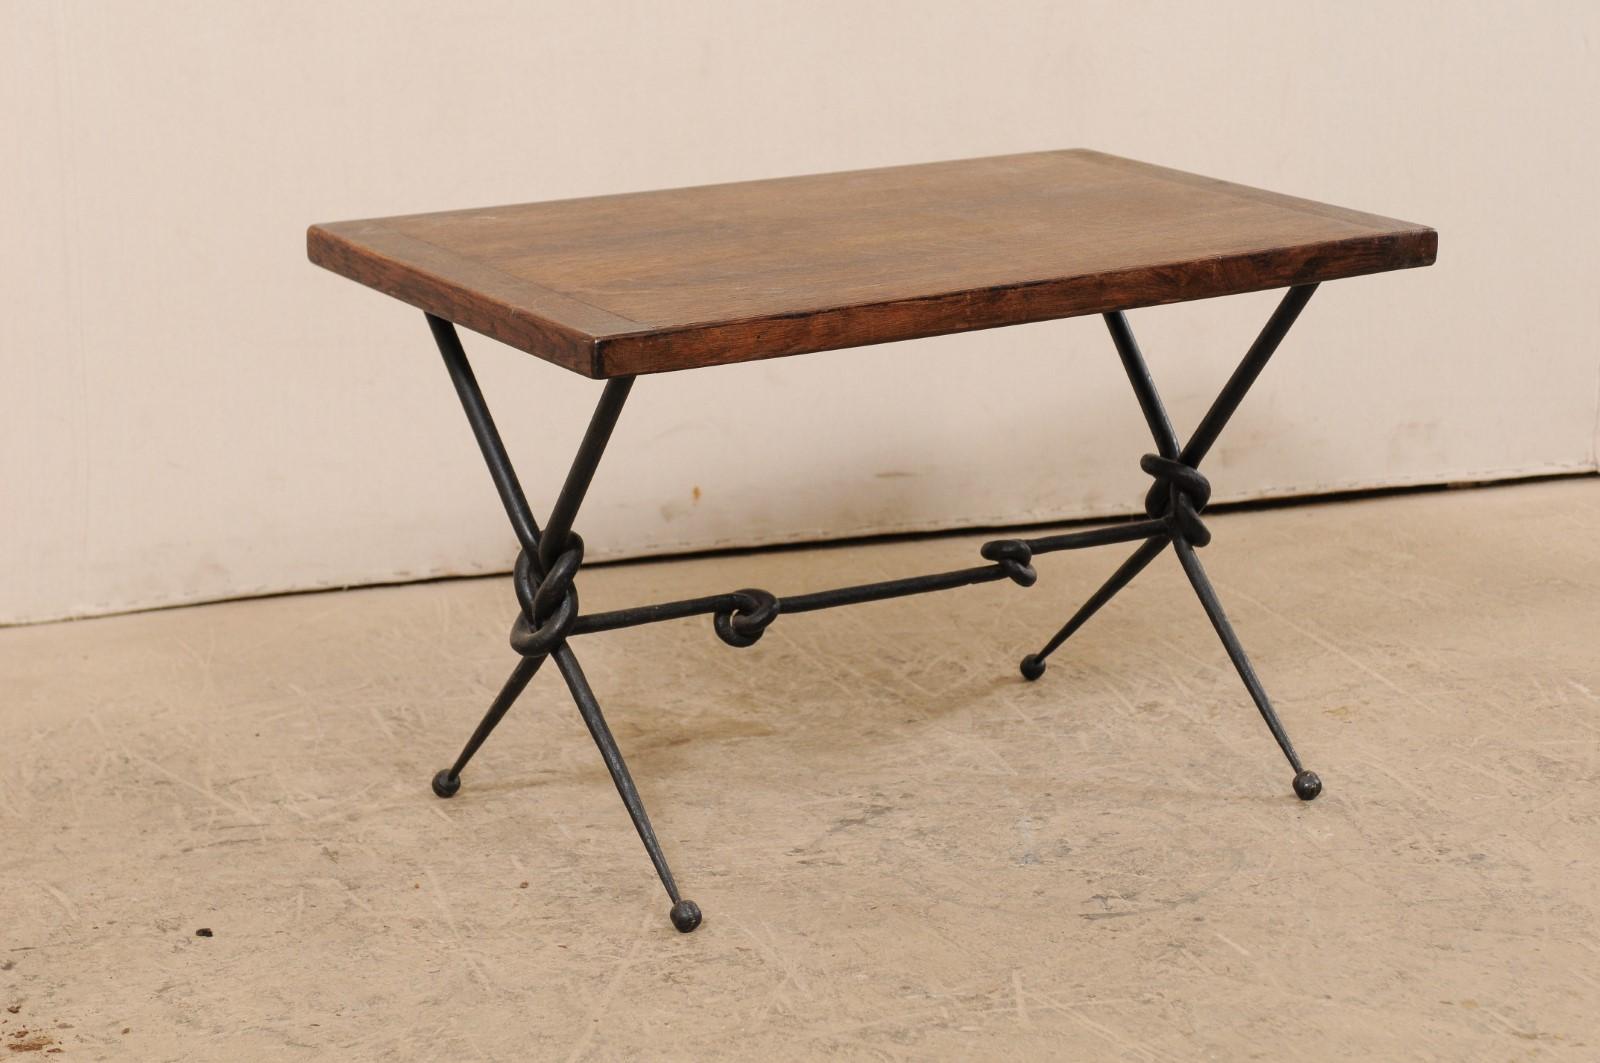 A French coffee table with a fabulously knotted forged-iron base from the mid 20th century. This vintage coffee table from France features a rectangular-shaped medium-toned wooden top, supported upon an artfully designed hand-forged iron base of